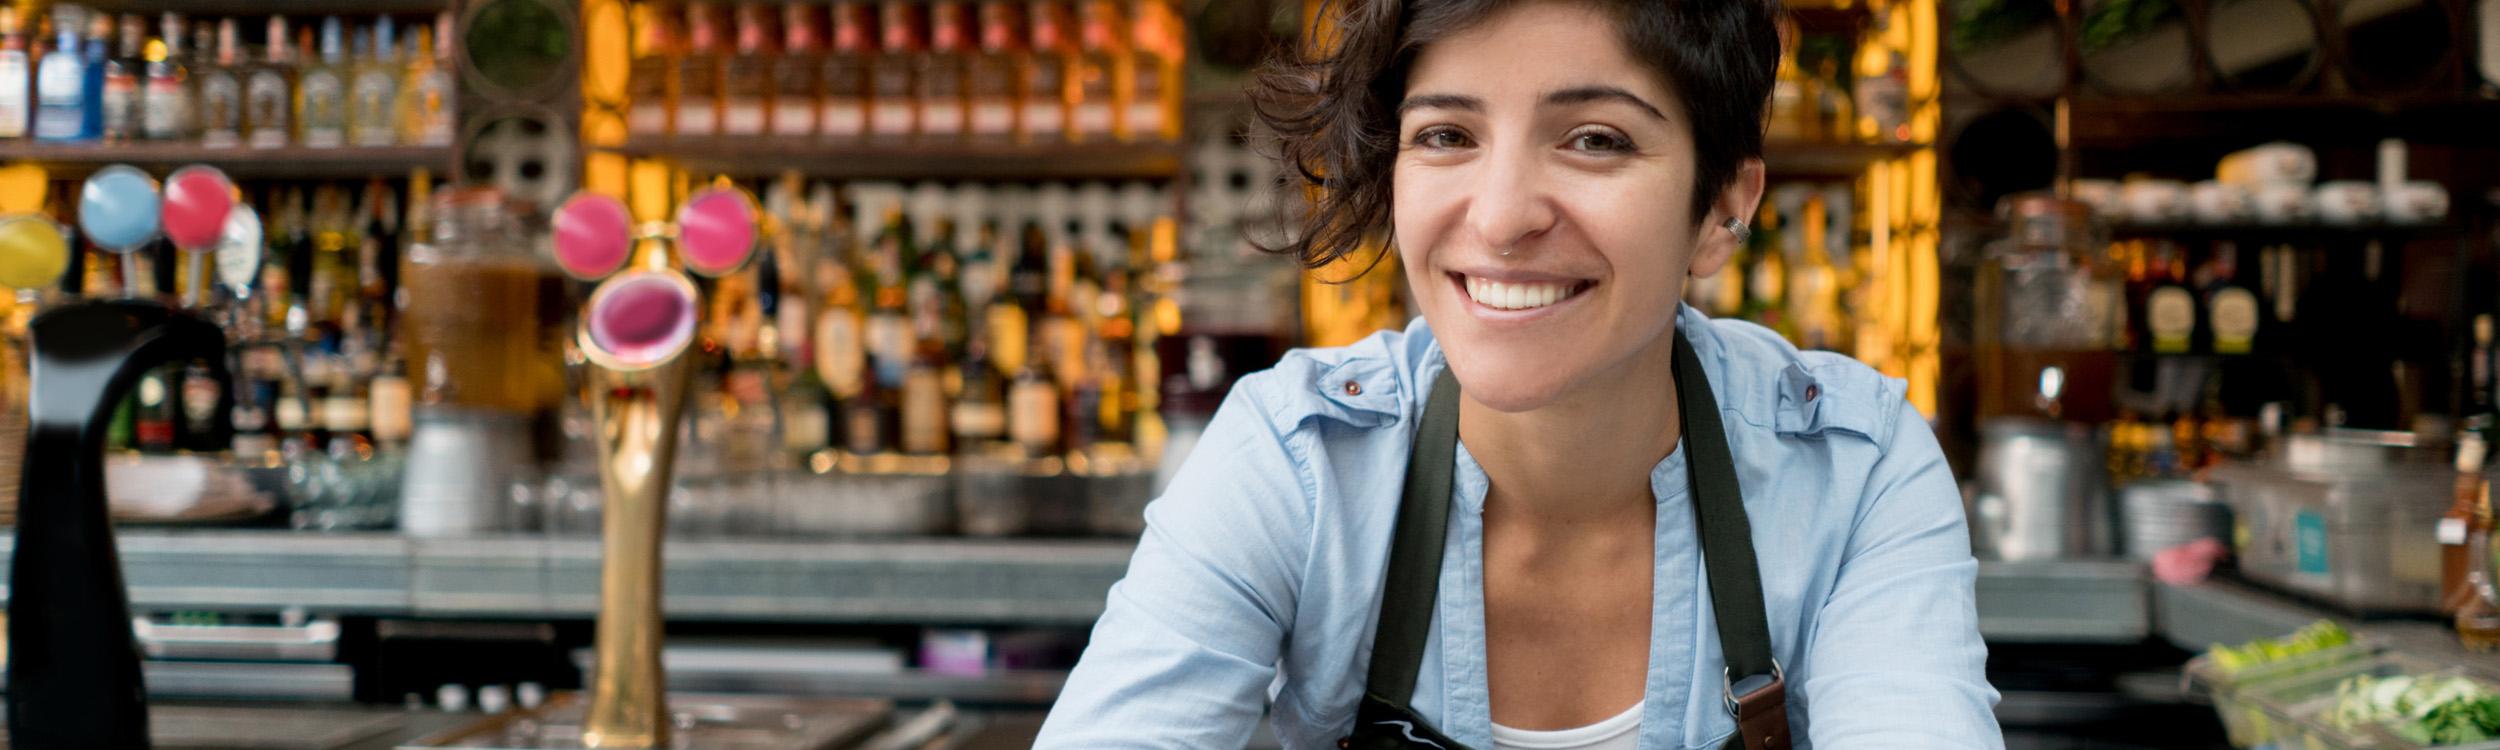 female buisiness owner smiling in front of her bar